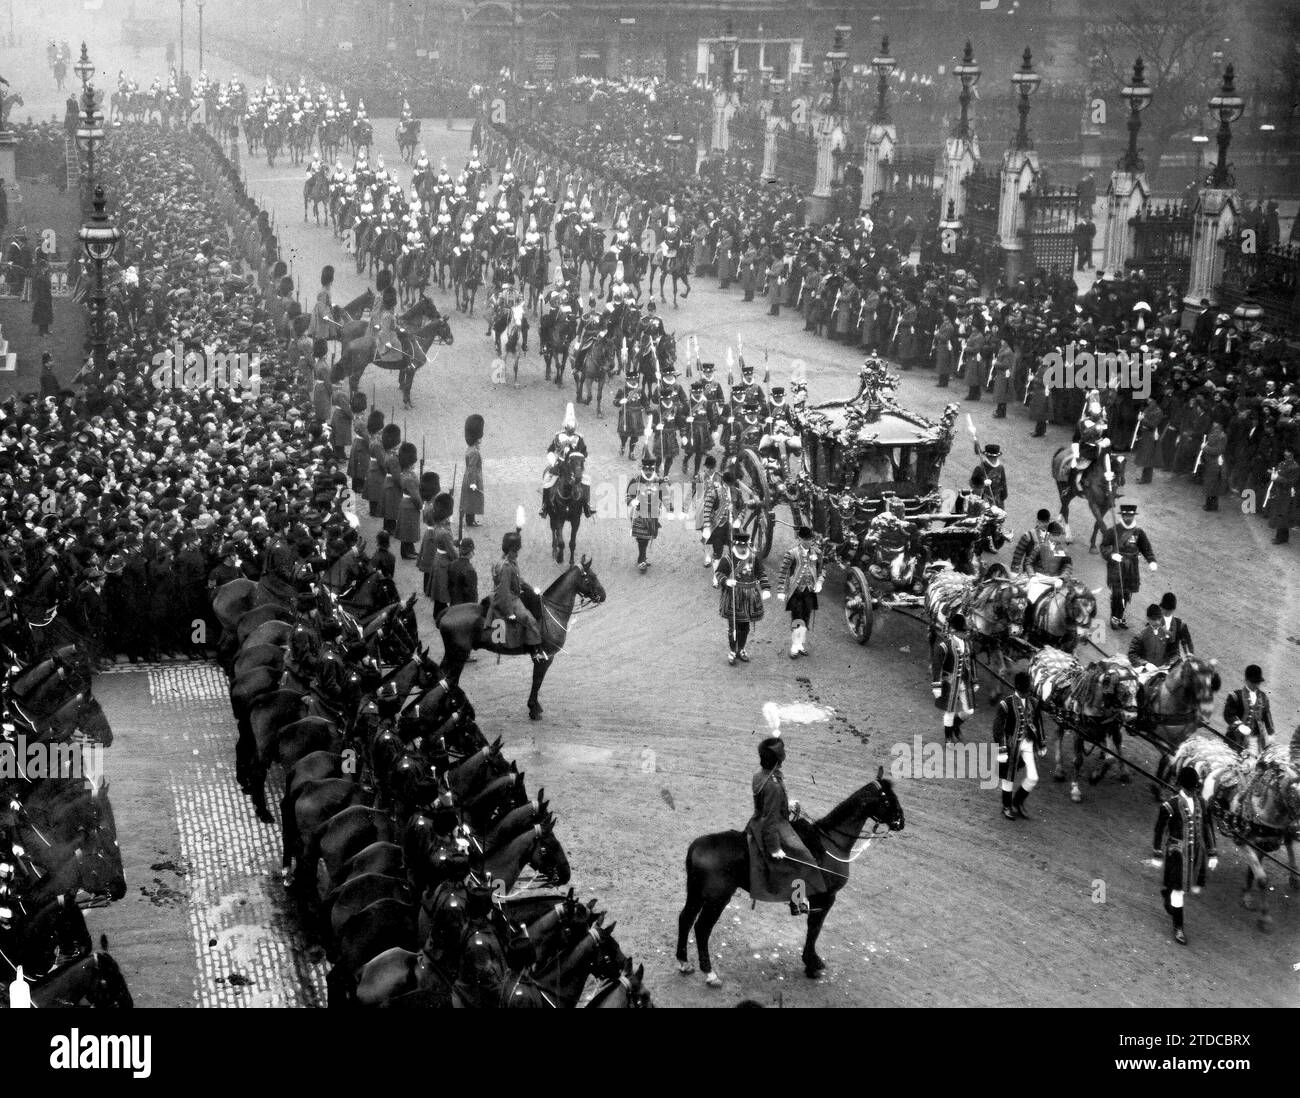 02/01/1911. The opening of the English parliament. King George V's procession arriving at the Parliament building. Credit: Album / Archivo ABC / Charles Trampus Stock Photo